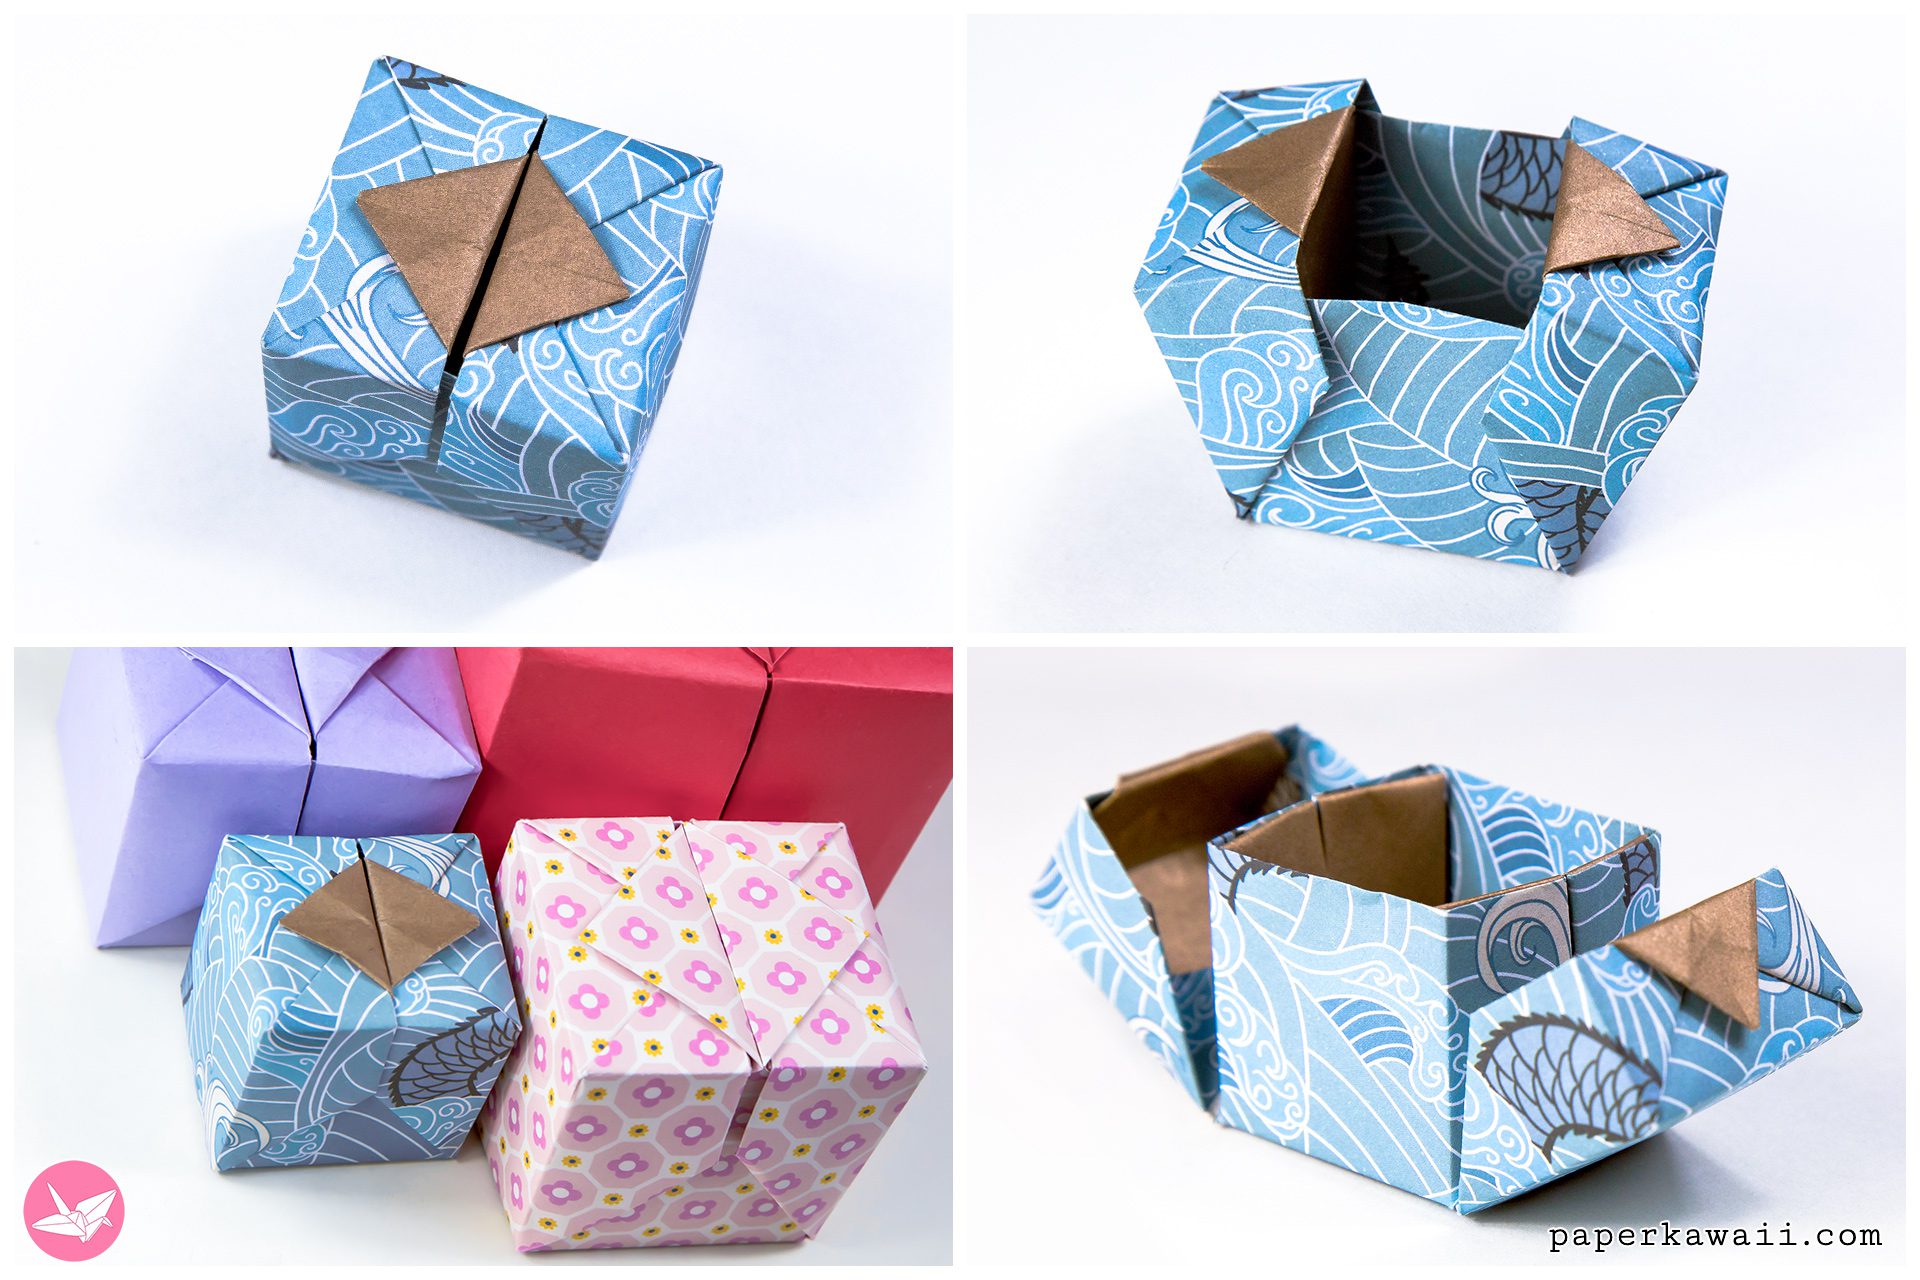 Amazing Origami Boxes: 20 Origami Models with Instructions and Diagrams [Book]